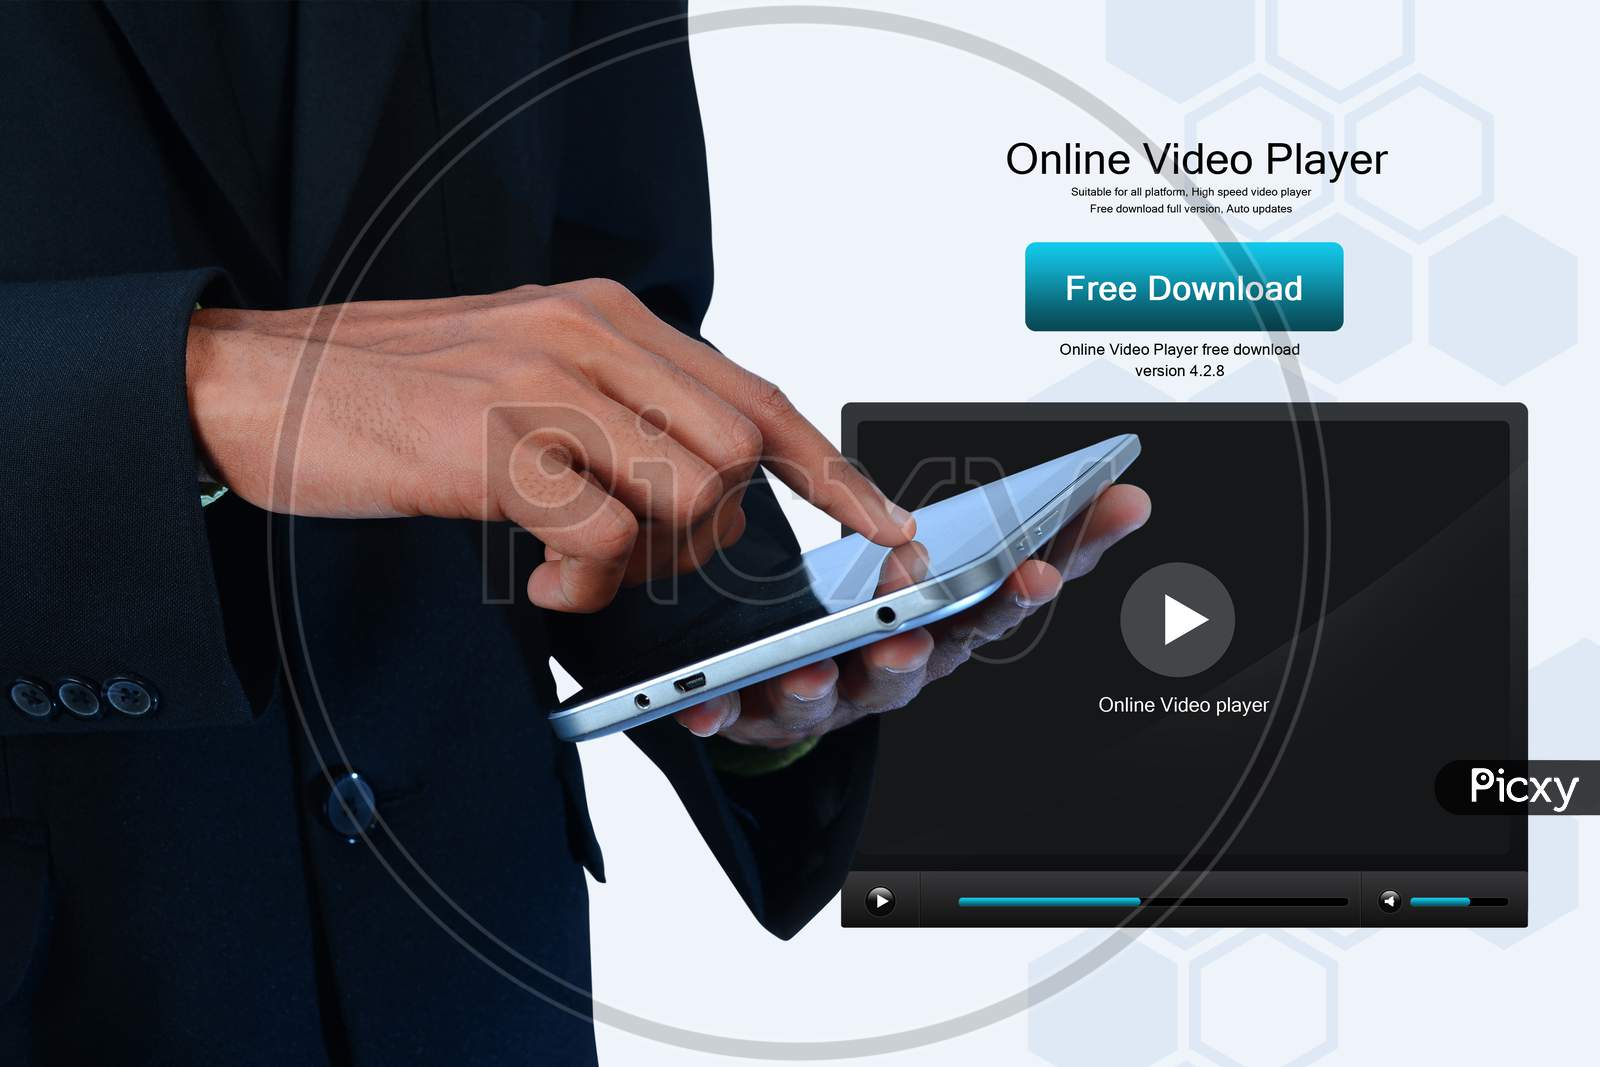 Close up shot of Person's Hand using a tablet or iPad with Online Video Player in the Background